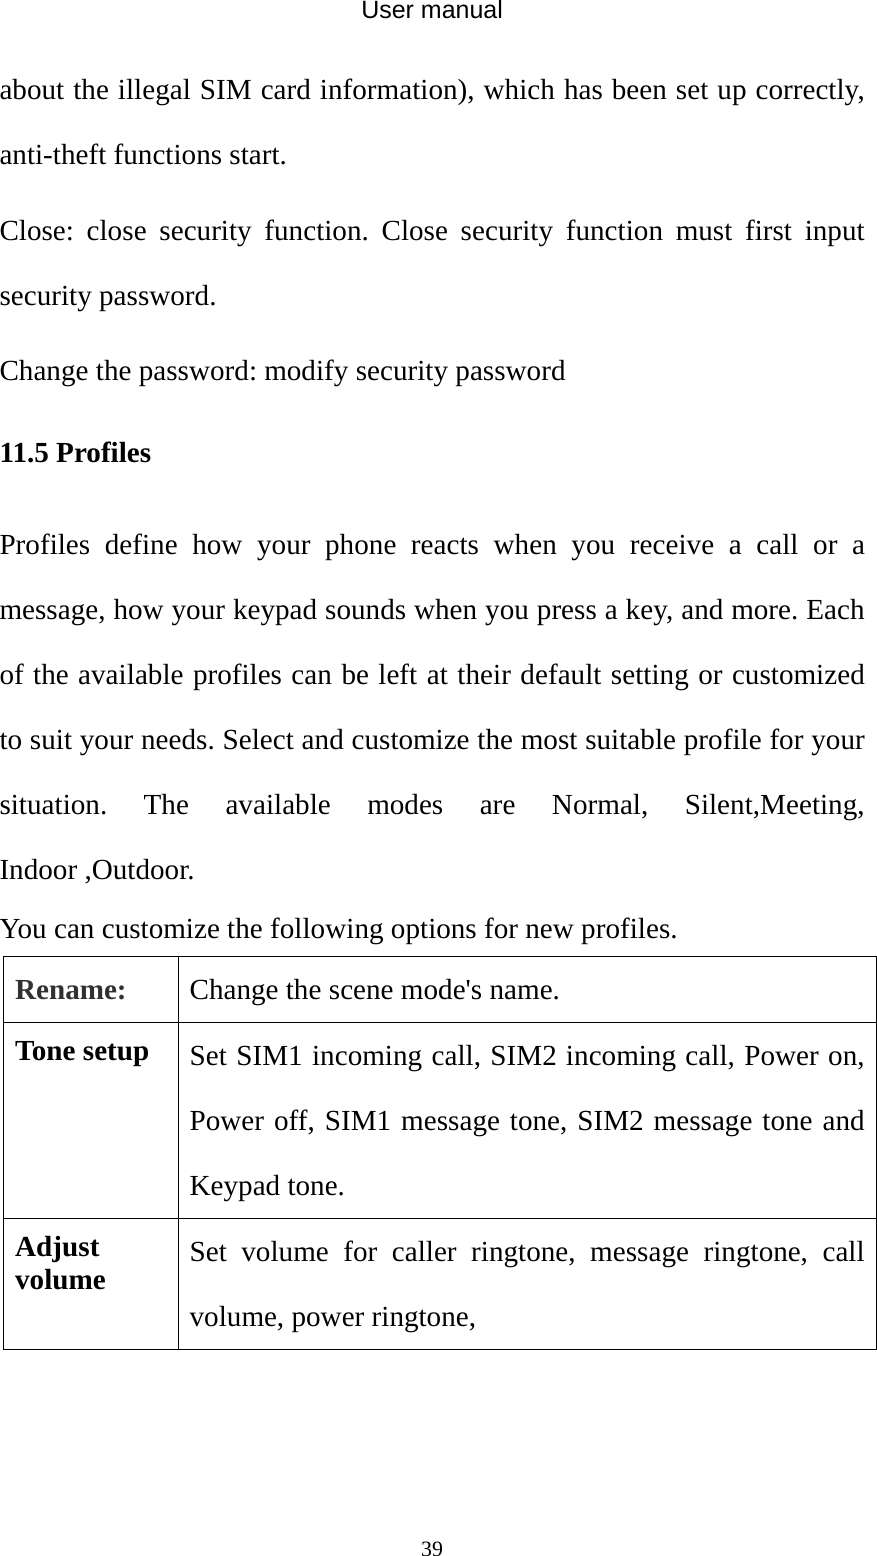 User manual  39about the illegal SIM card information), which has been set up correctly, anti-theft functions start. Close: close security function. Close security function must first input security password.   Change the password: modify security password 11.5 Profiles Profiles define how your phone reacts when you receive a call or a message, how your keypad sounds when you press a key, and more. Each of the available profiles can be left at their default setting or customized to suit your needs. Select and customize the most suitable profile for your situation. The available modes are Normal, Silent,Meeting, Indoor ,Outdoor.   You can customize the following options for new profiles. Rename:  Change the scene mode&apos;s name. Tone setup  Set SIM1 incoming call, SIM2 incoming call, Power on, Power off, SIM1 message tone, SIM2 message tone and Keypad tone. Adjust volume  Set volume for caller ringtone, message ringtone, call volume, power ringtone, 